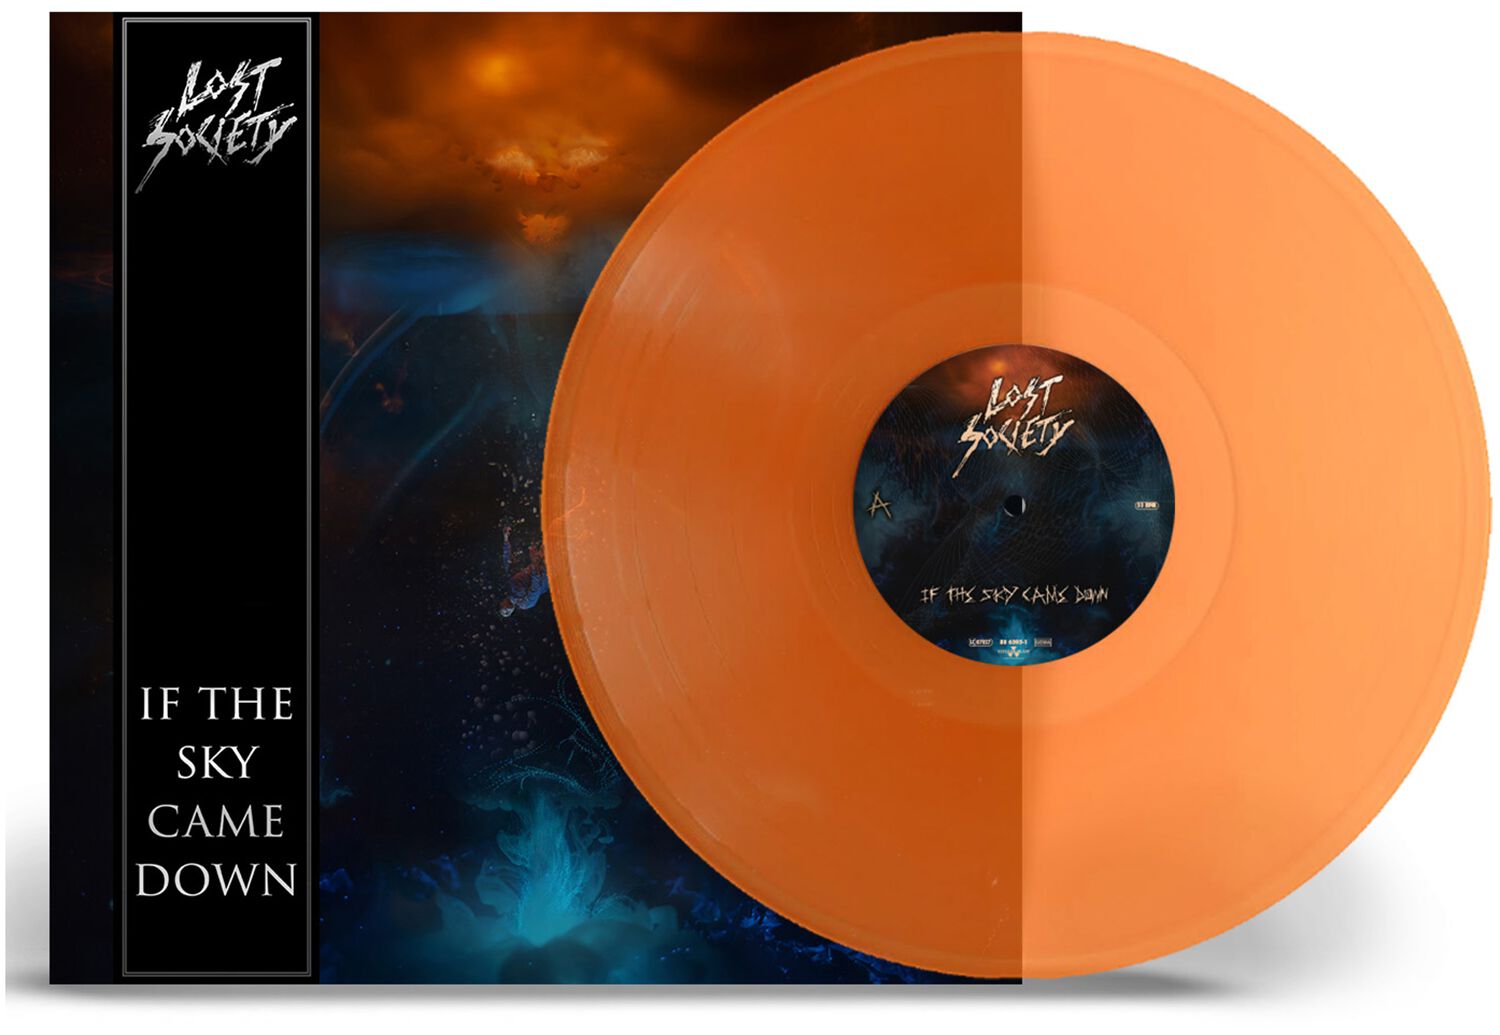 Lost Society If the sky came down LP multicolor